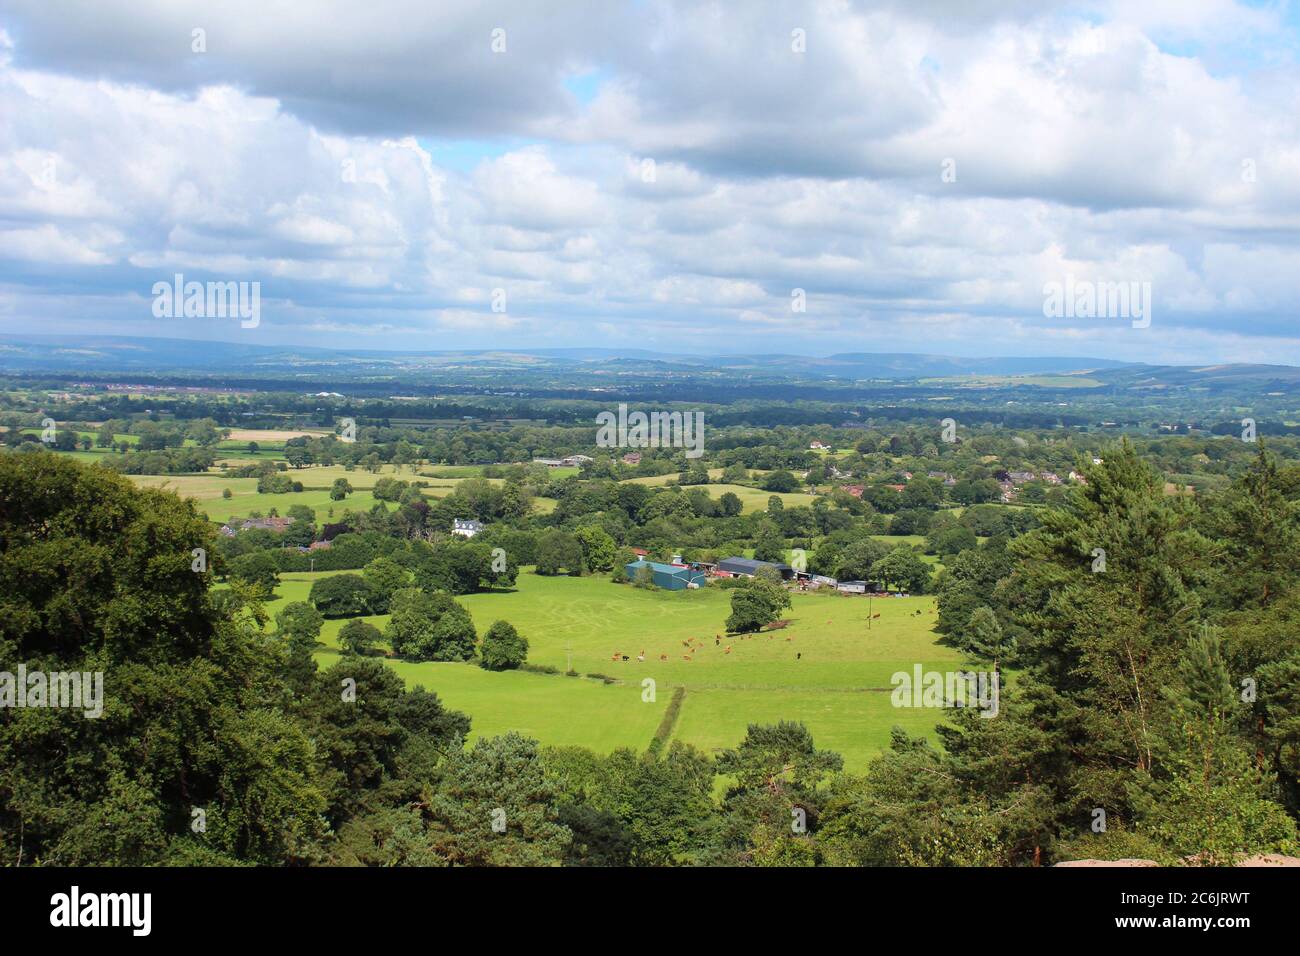 View of Cheshire countryside from Stormy Point at Alderley edge in Cheshire, England Stock Photo